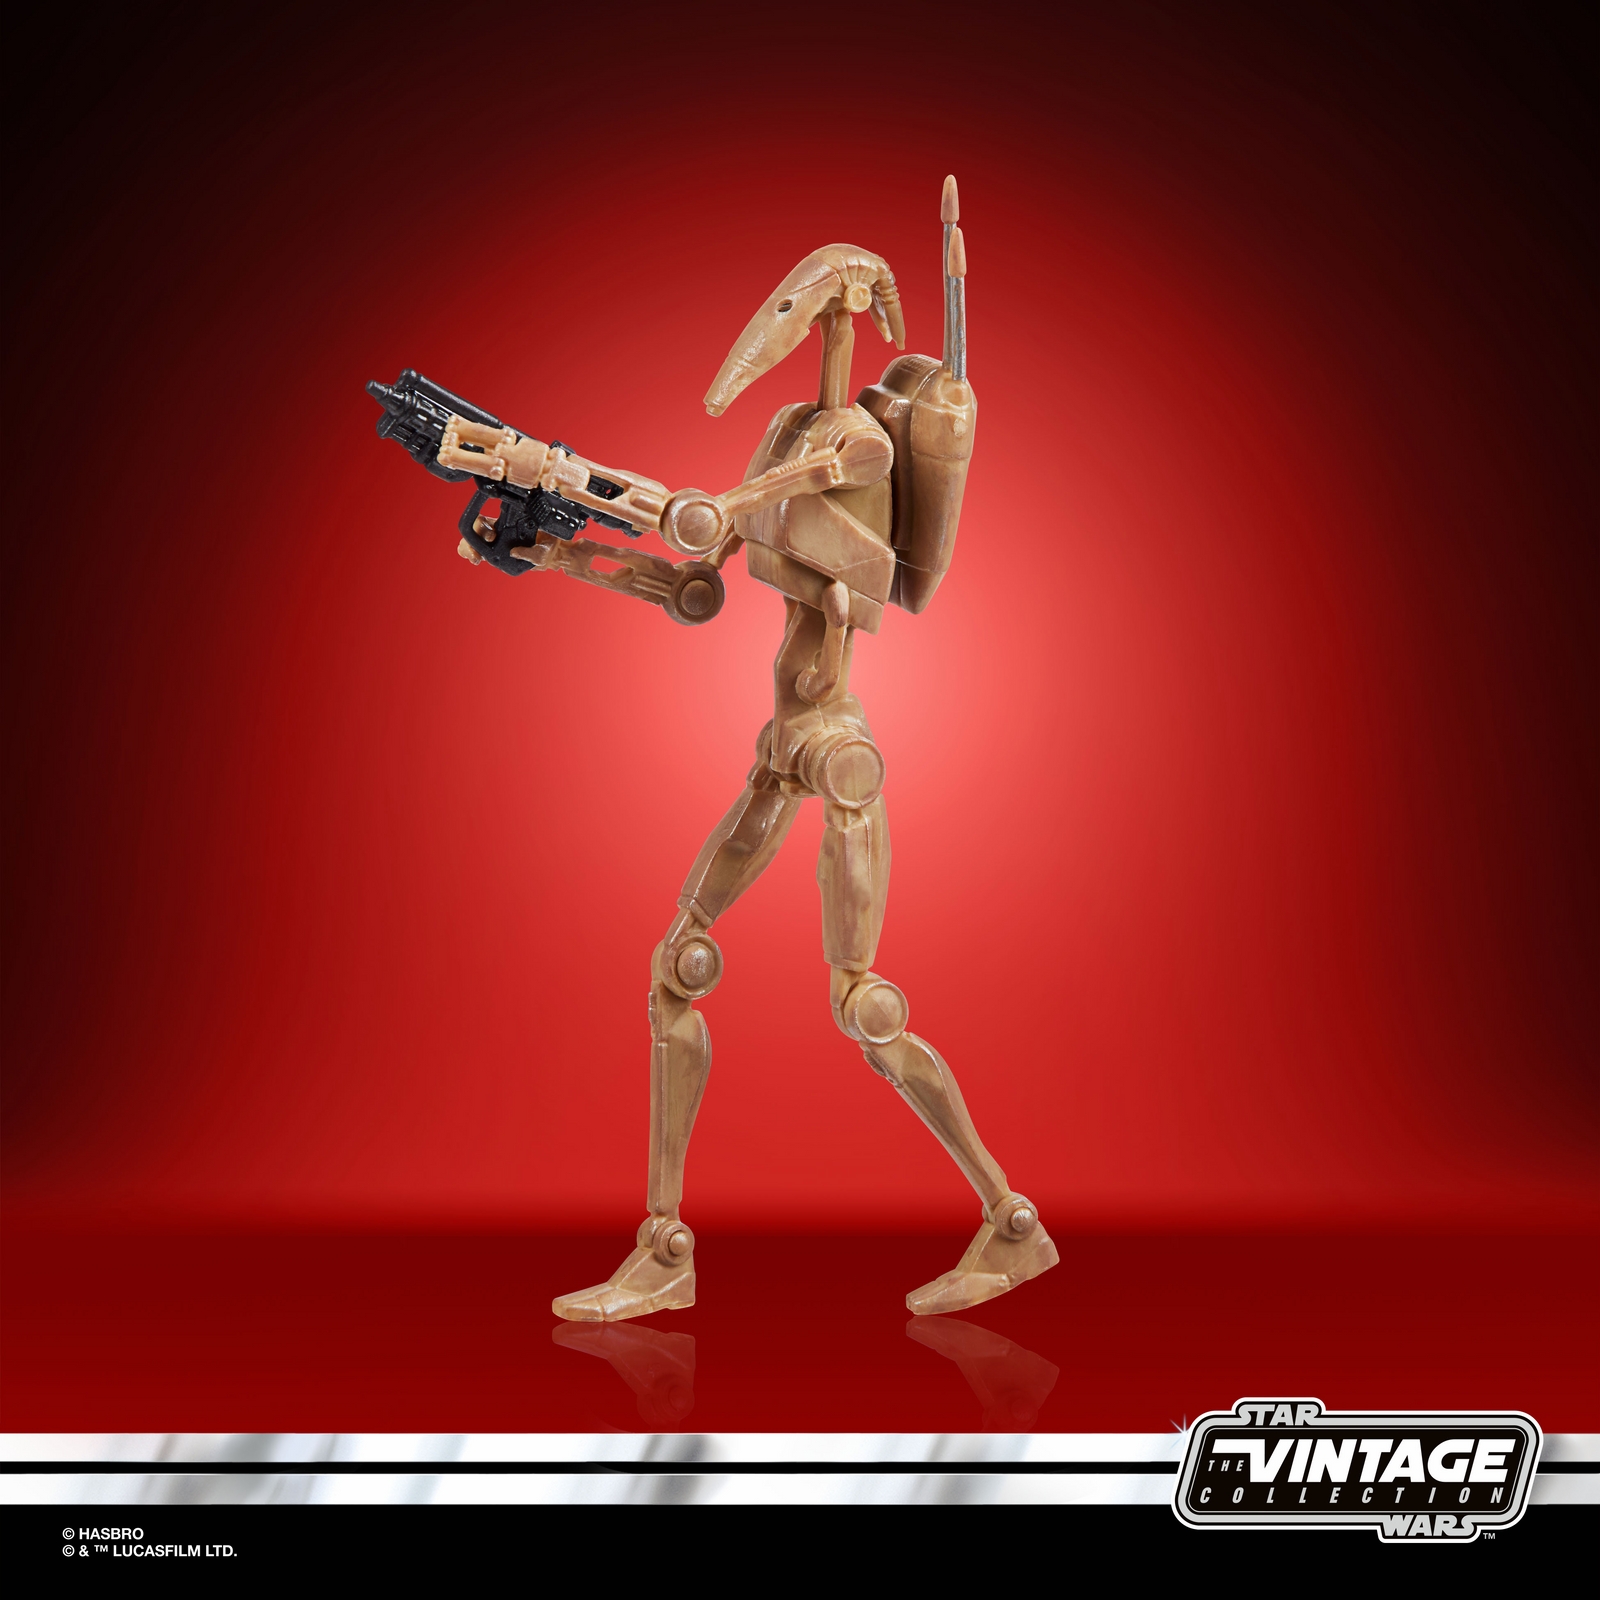 STAR WARS THE VINTAGE COLLECTION 3.75-INCH BATTLE DROID Figure - oop (4).jpg